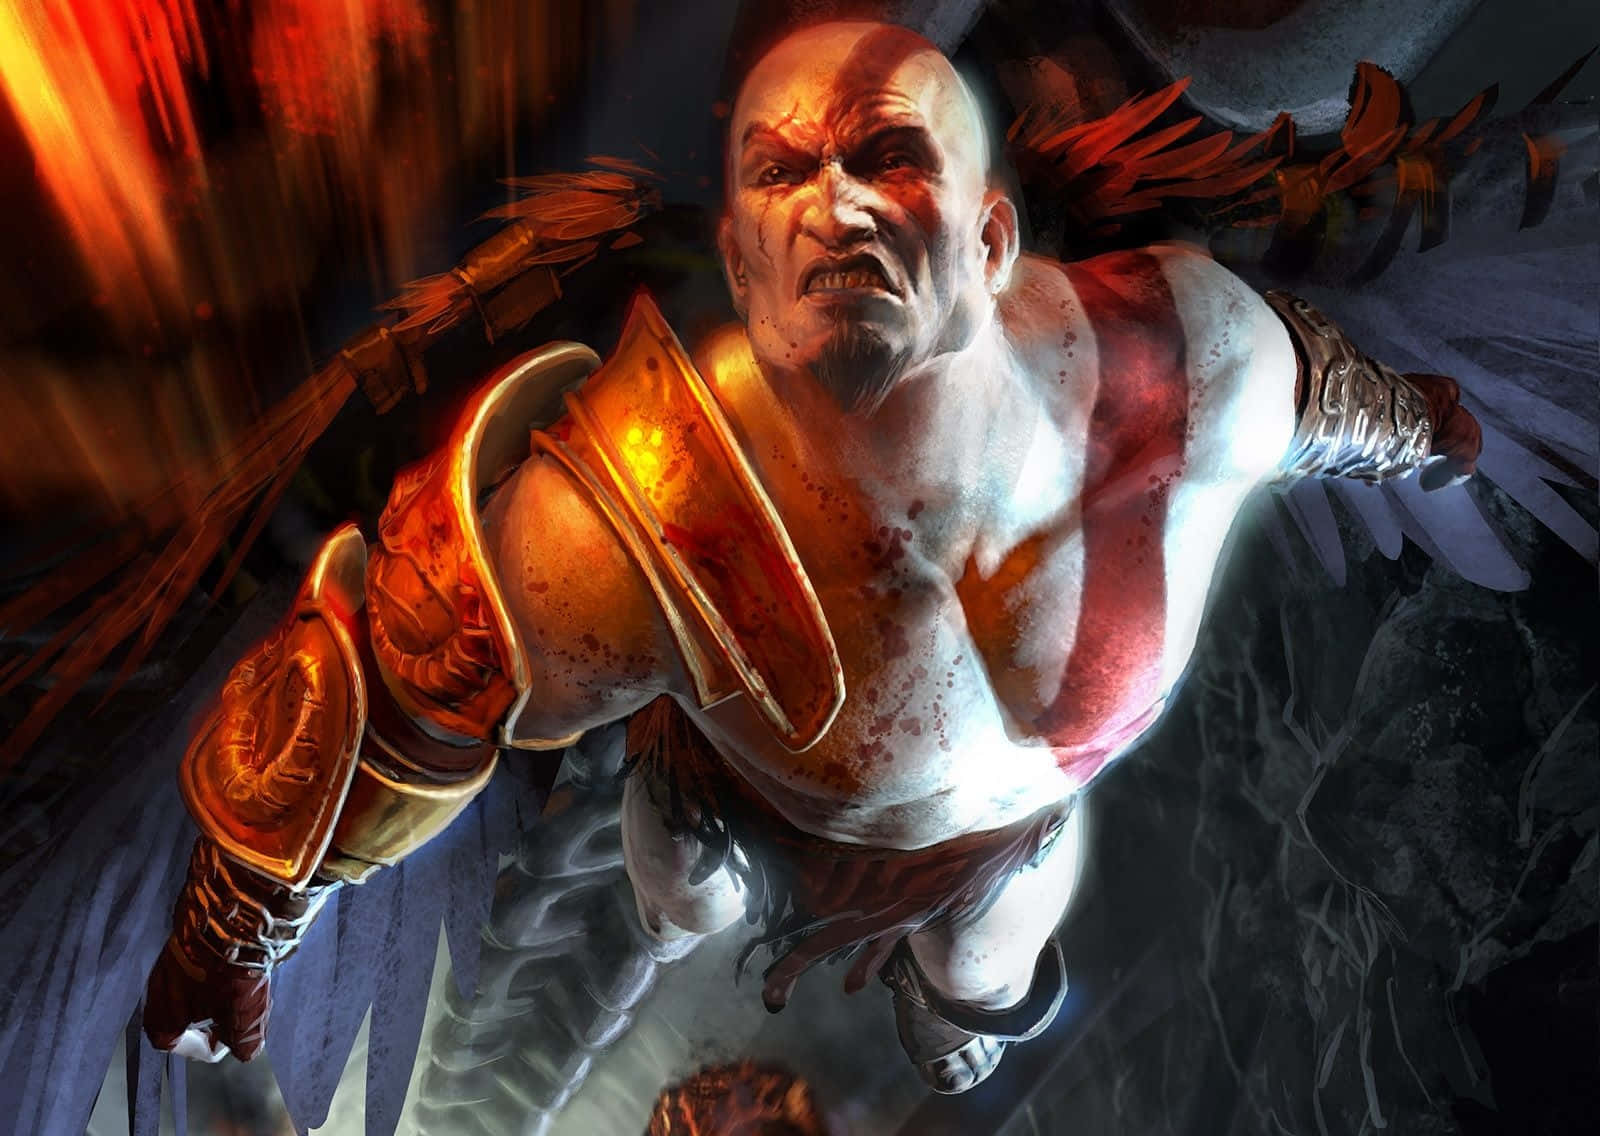 Kratos, the Spartan-turned-God, returns with a vengeance in God Of War III Wallpaper